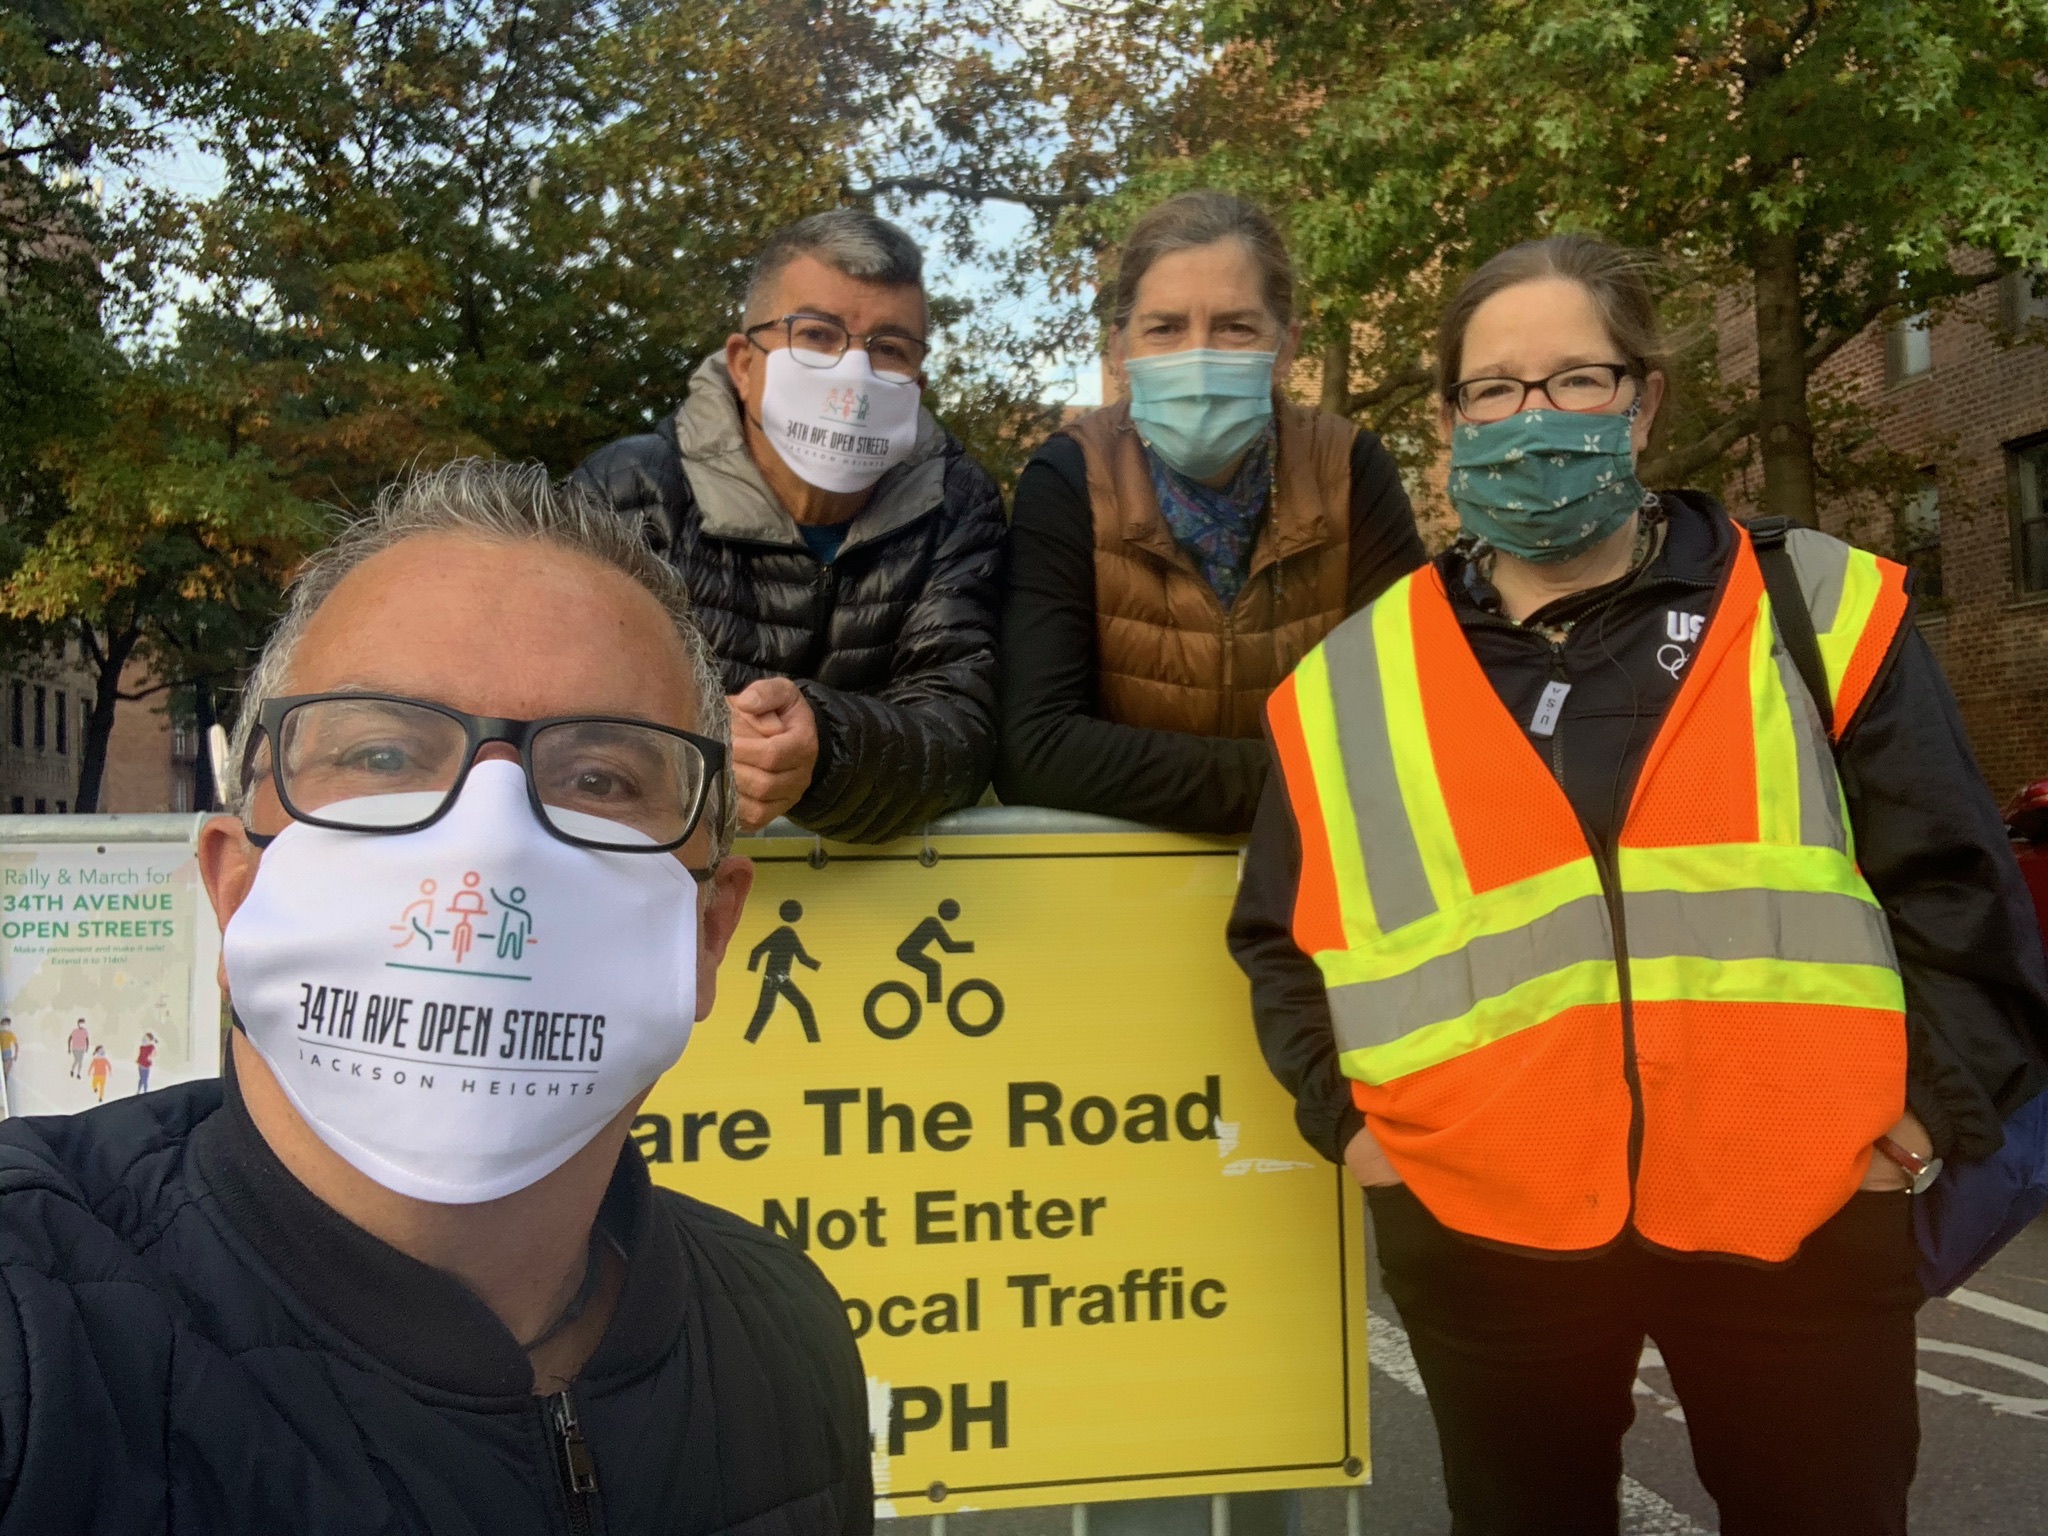 Jim Burke is taking a selfie with three friends leaning on a barricade on 34th Avenue. Two wear masks that say "34th Ave Open Streets." One is wearing a fluorescent safety vest.